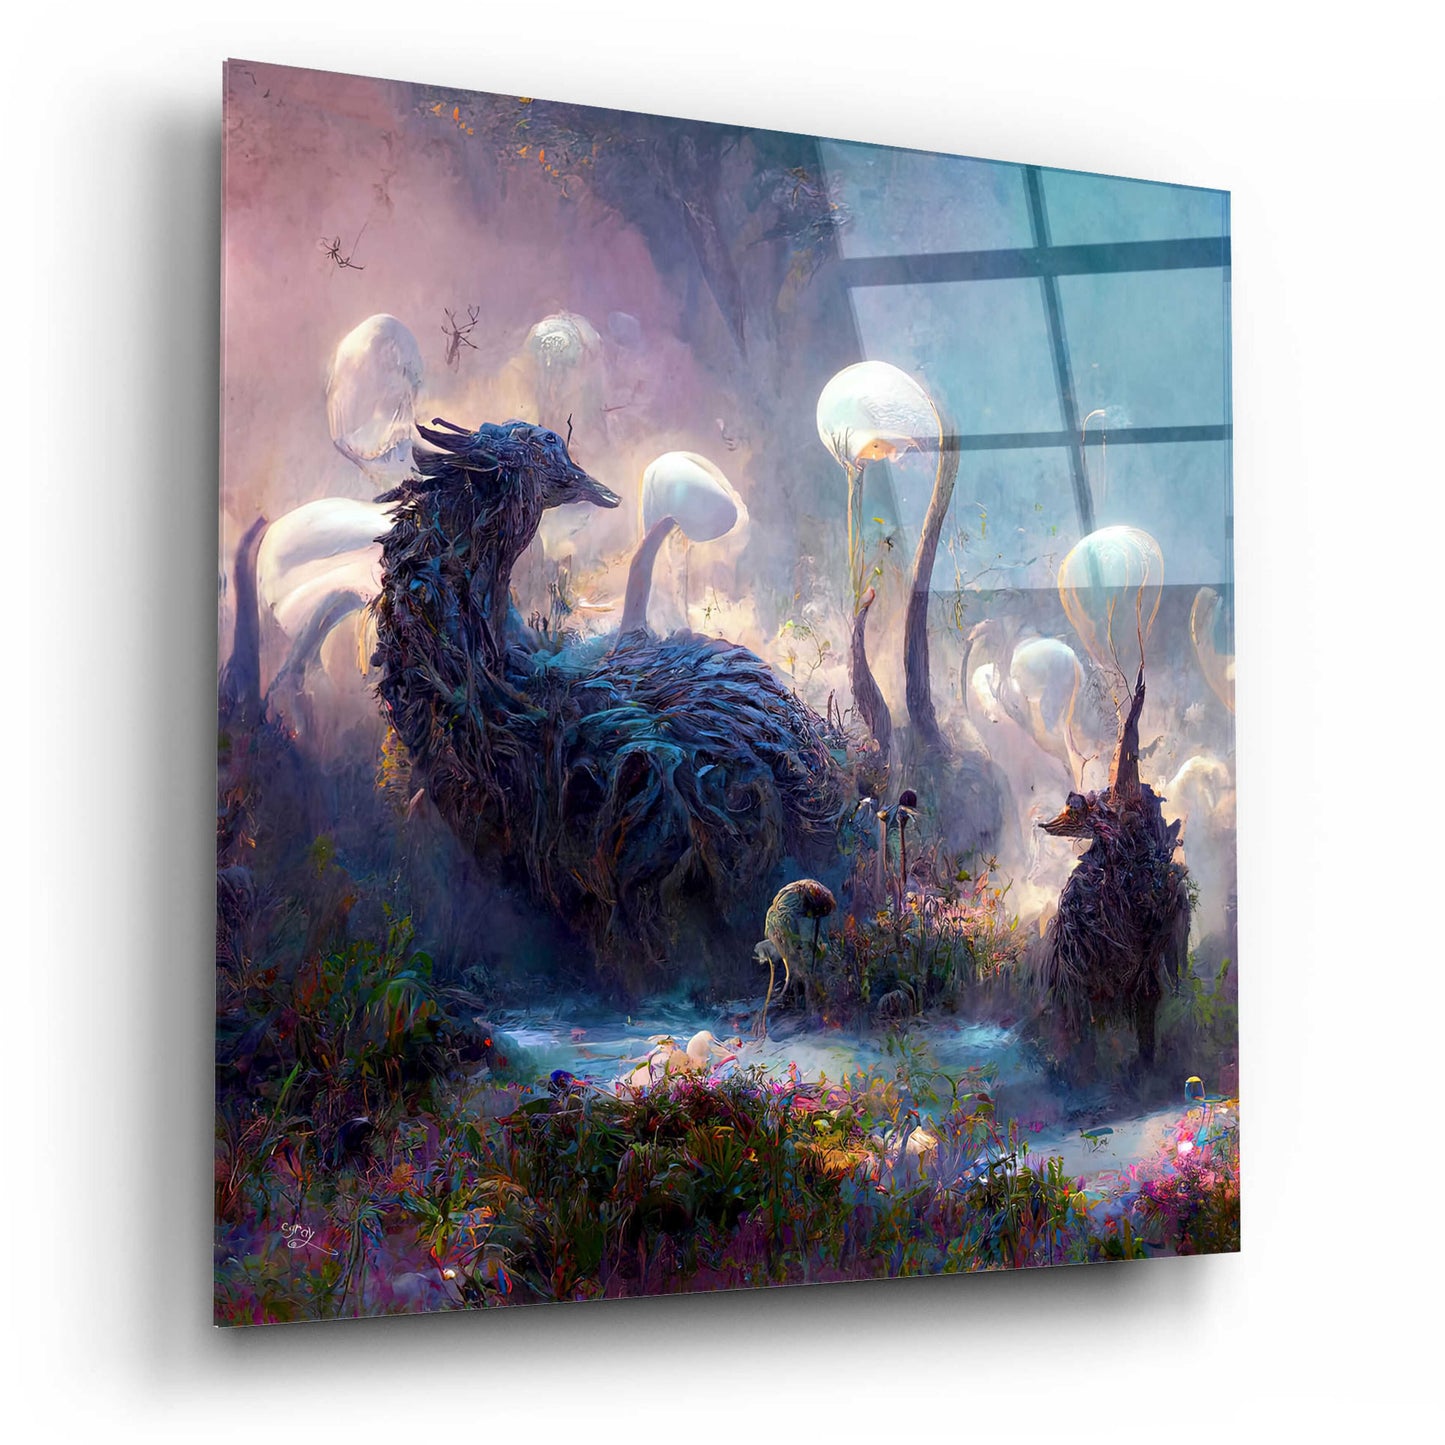 Epic Art 'Dreamscapes 2' by Cameron Gray, Acrylic Glass Wall Art,12x12